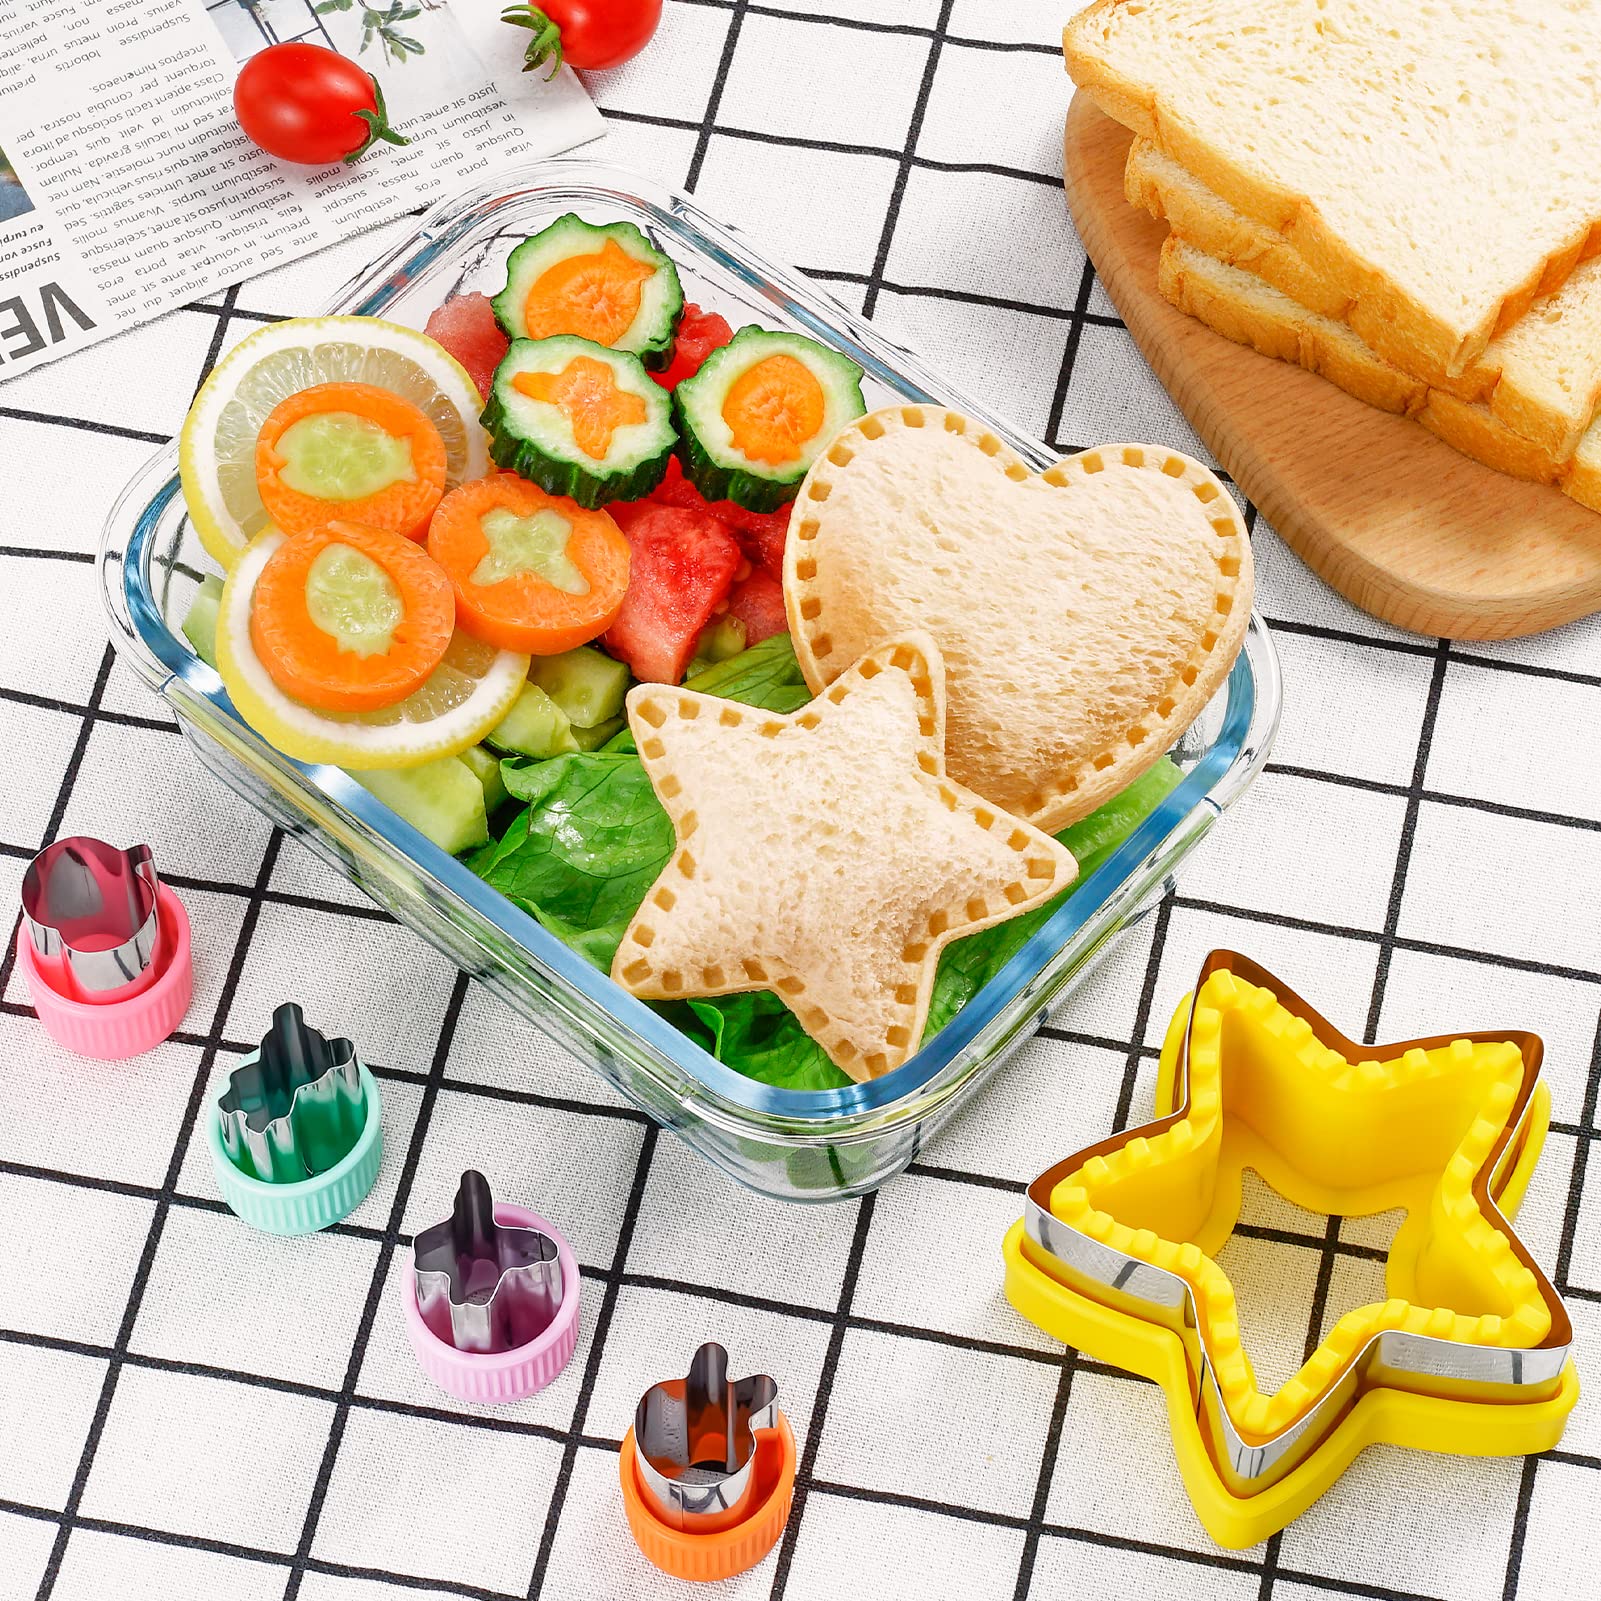 20Pcs Sandwich Cutter and Sealer Set for Kids, Decruster Maker Holiday Heart Cookie Cutters Fruit Vegetable Shapes Boys & Girls Bento Lunch Box with Mickey Mouse Dinosaur Star, etc